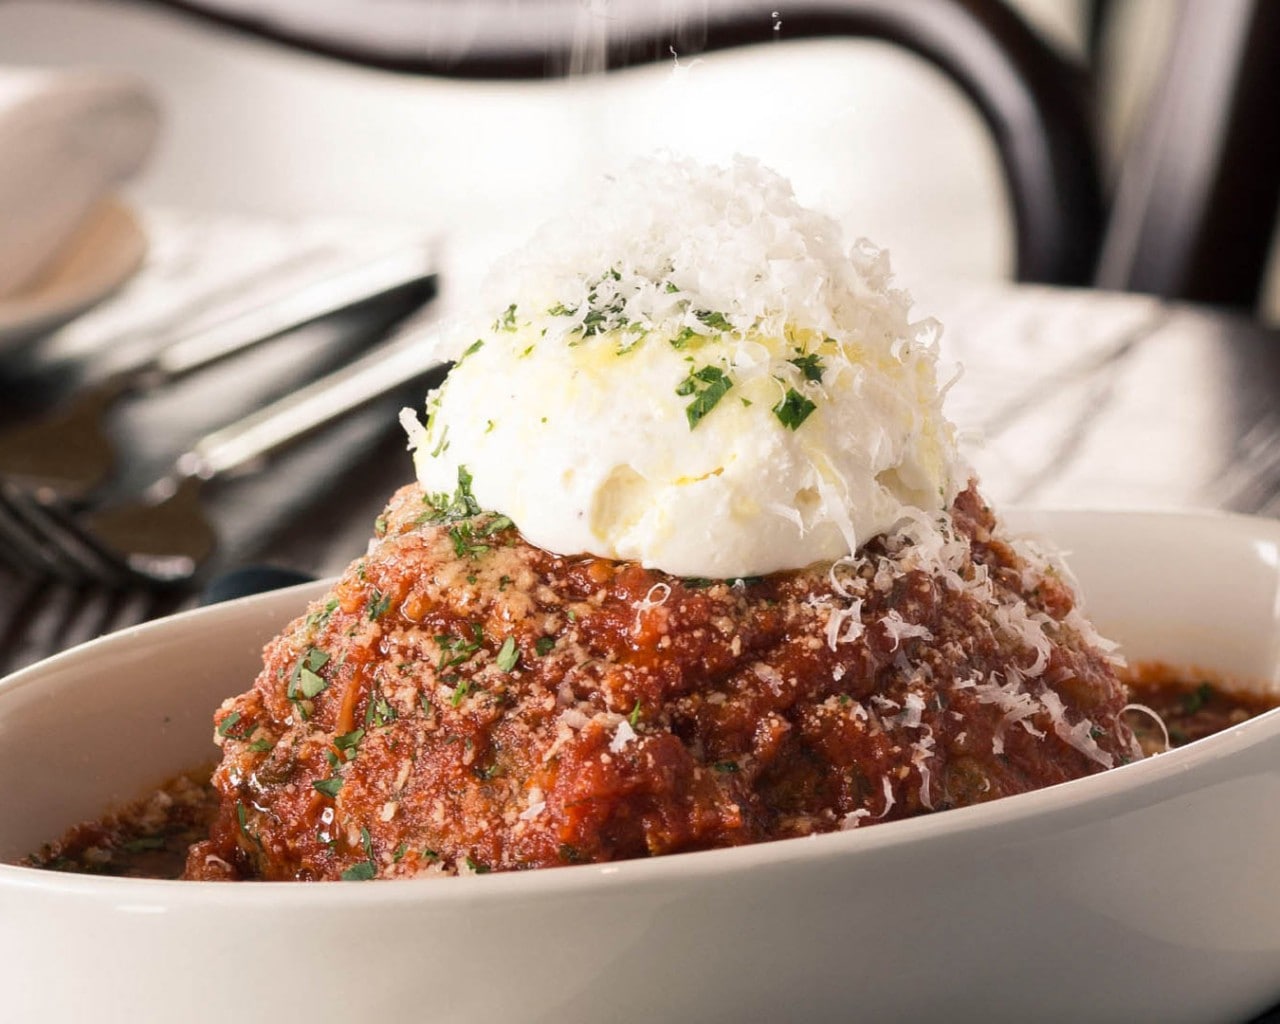 Meatball with ricotta cheese served at an Italian restaurant in Singapore